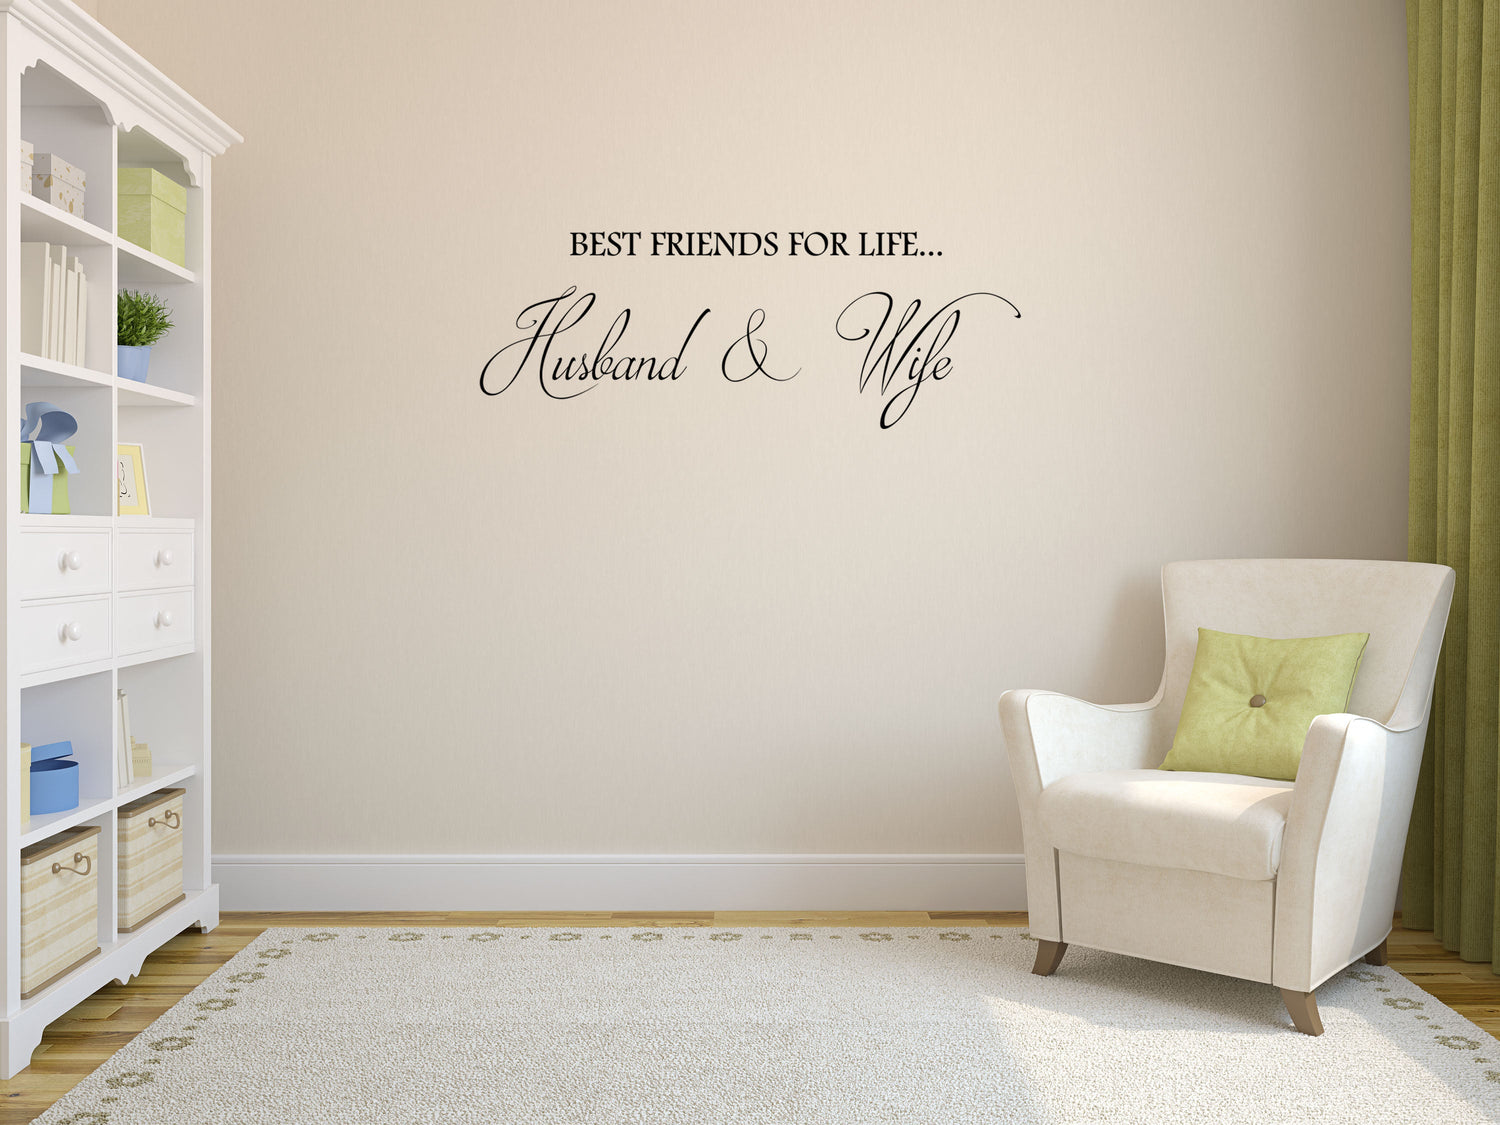 Best Friends For Life...Husband & Wife Marriage Sticker Vinyl Wall Decal Inspirational Wall Signs 